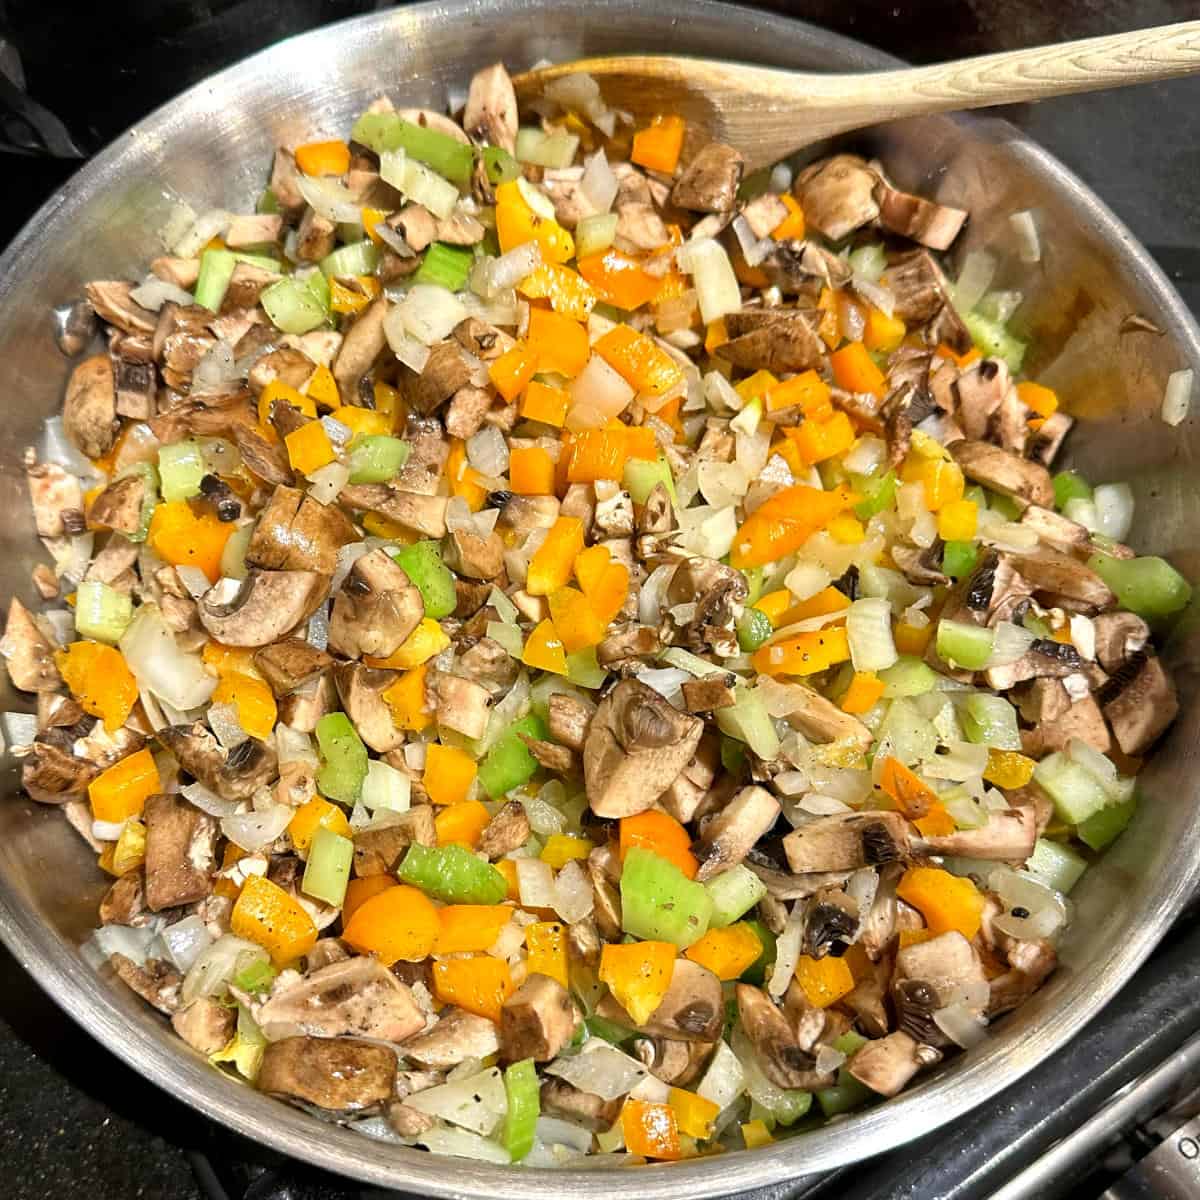 Mushrooms added to other veggies in skillet.